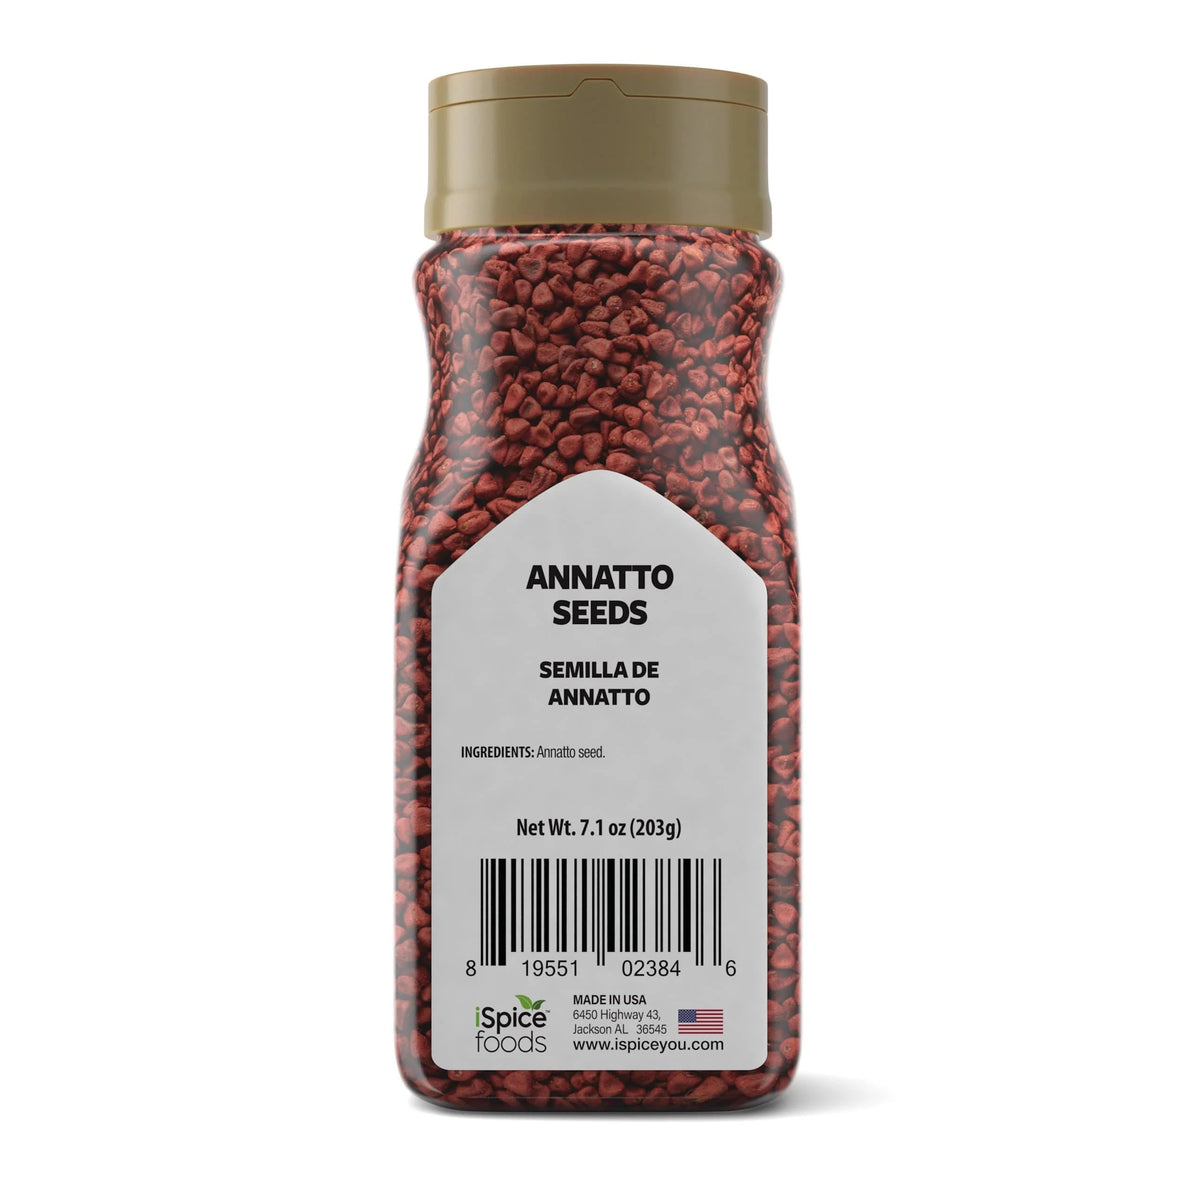 Discover the Magic of Annatto Seeds For Flavorful Meals